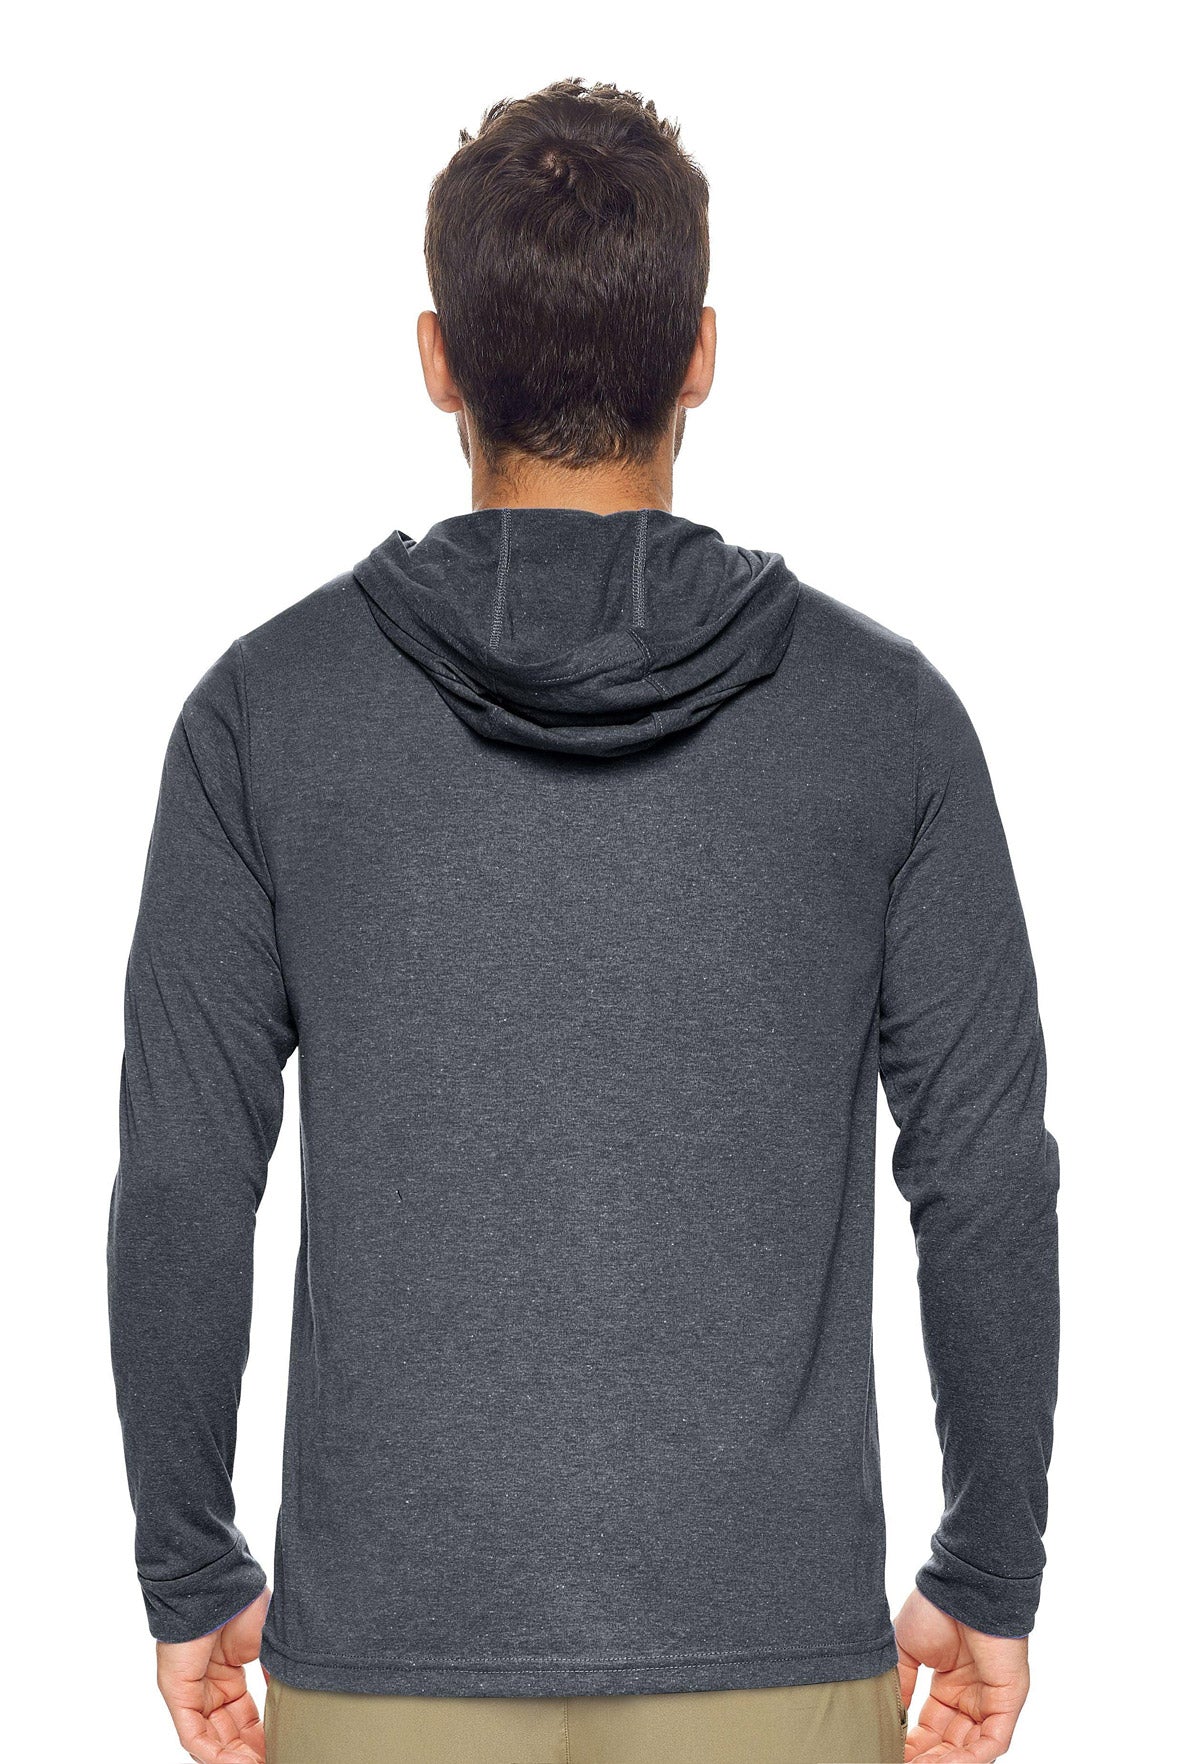 Expert Apparel Men's Hoodie Shirt Performance Dark Heather Charcoal Made in USA Image 3#color_dark-heather-charcoal